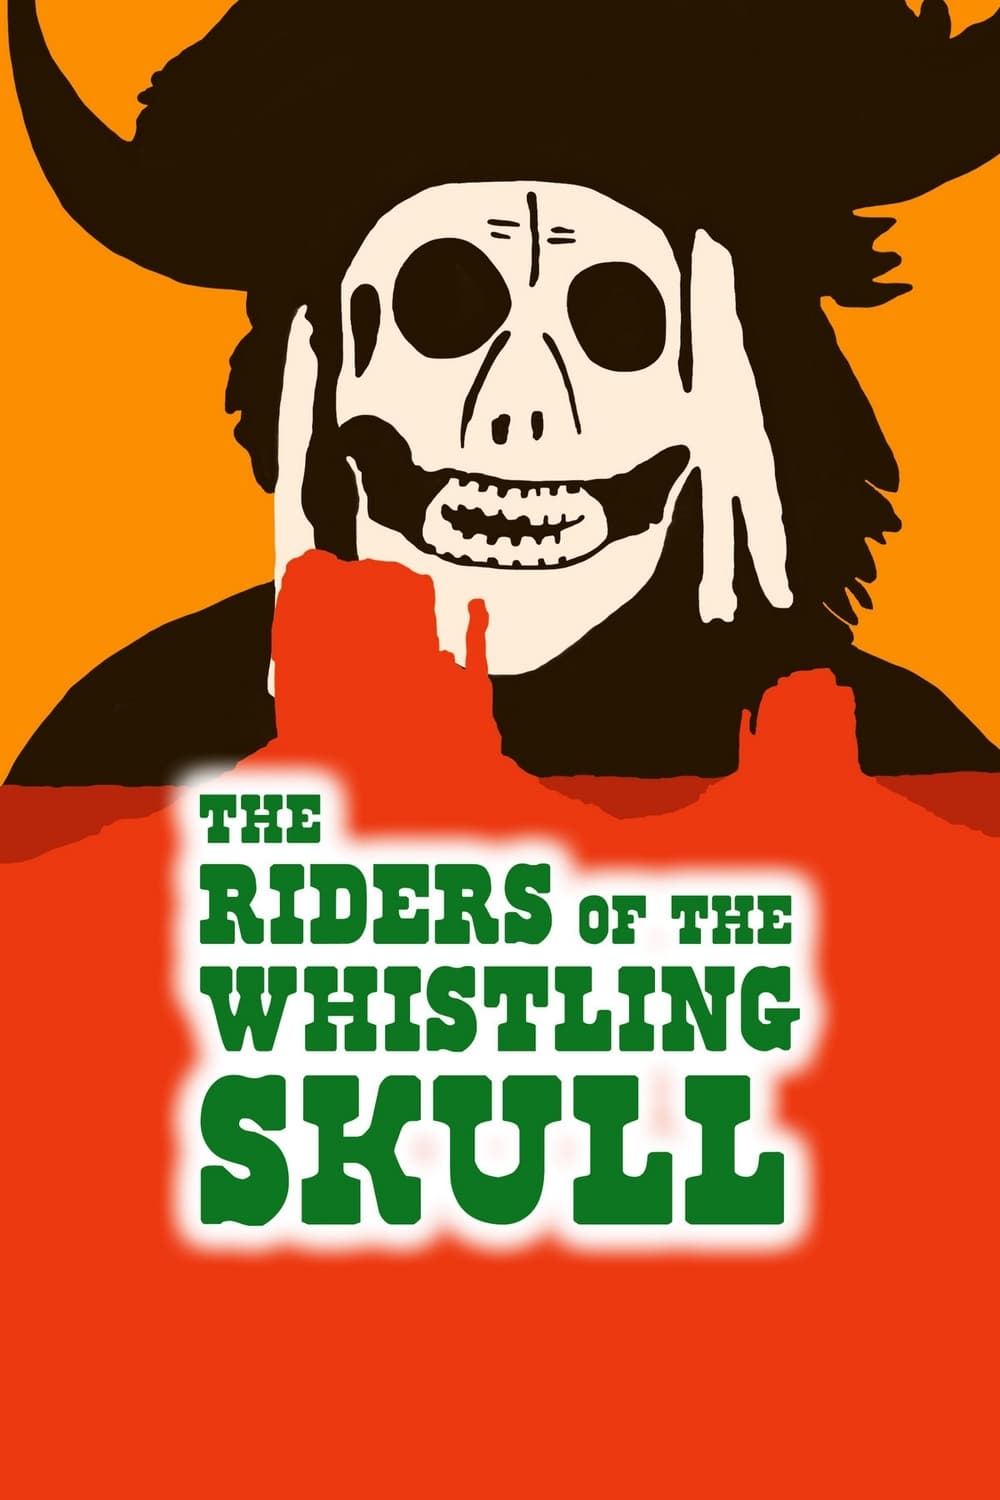 Riders of the Whistling Skull